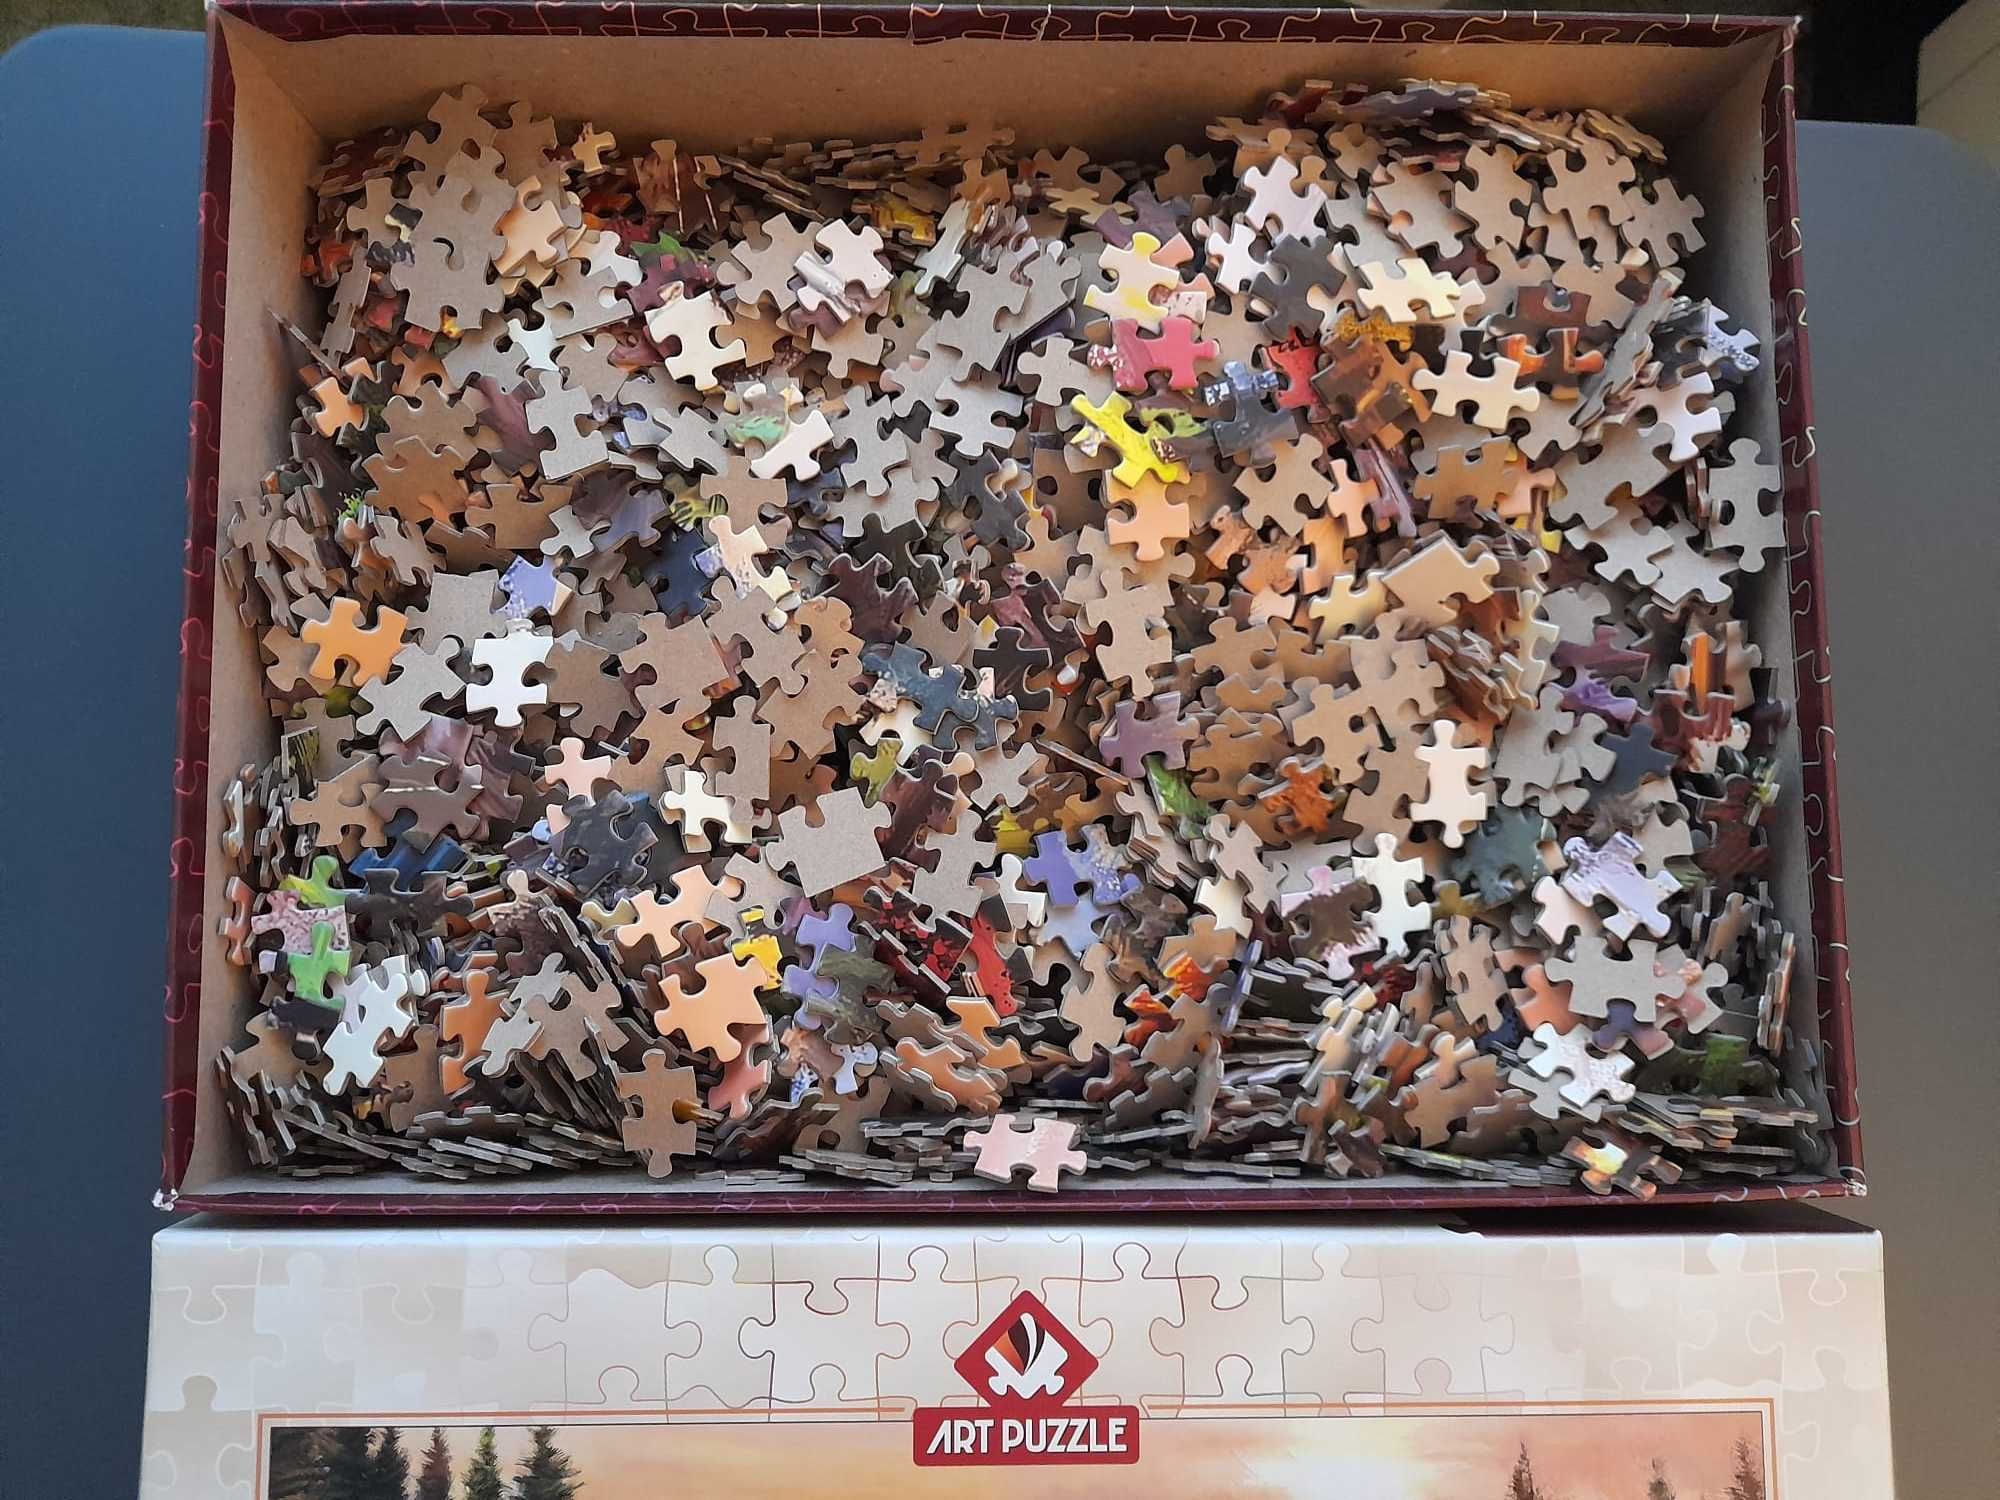 Puzzle Art Puzzle 3000 piese - Camping Friends (5520)